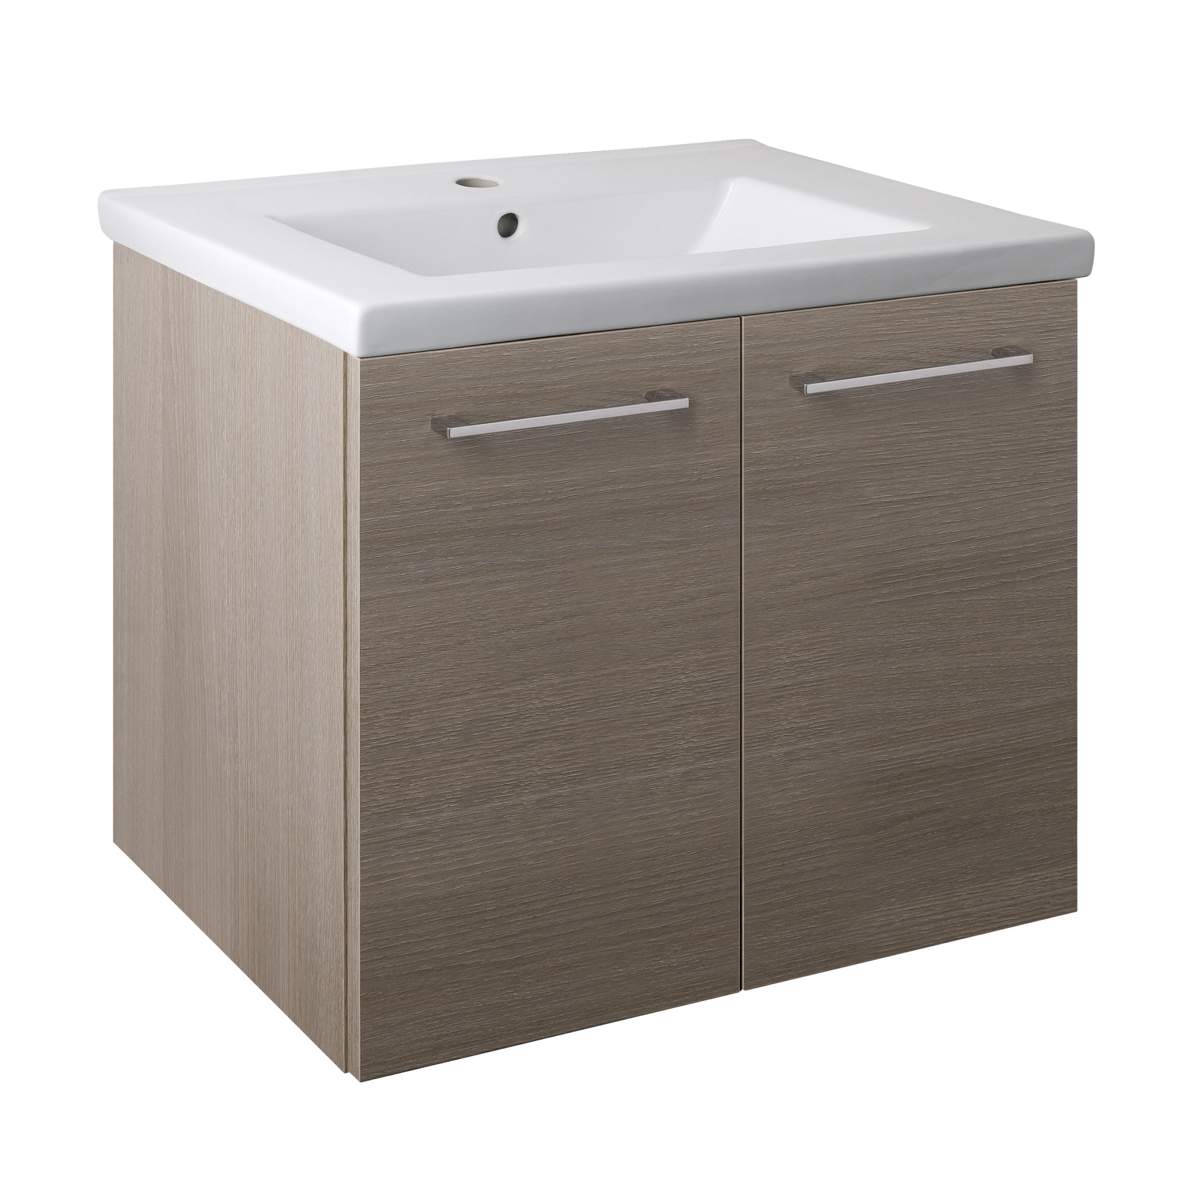 JTP Pace Units 600mm Wall Mounted Unit with Doors and Basin in Grey (PWM604GR + P600BS)